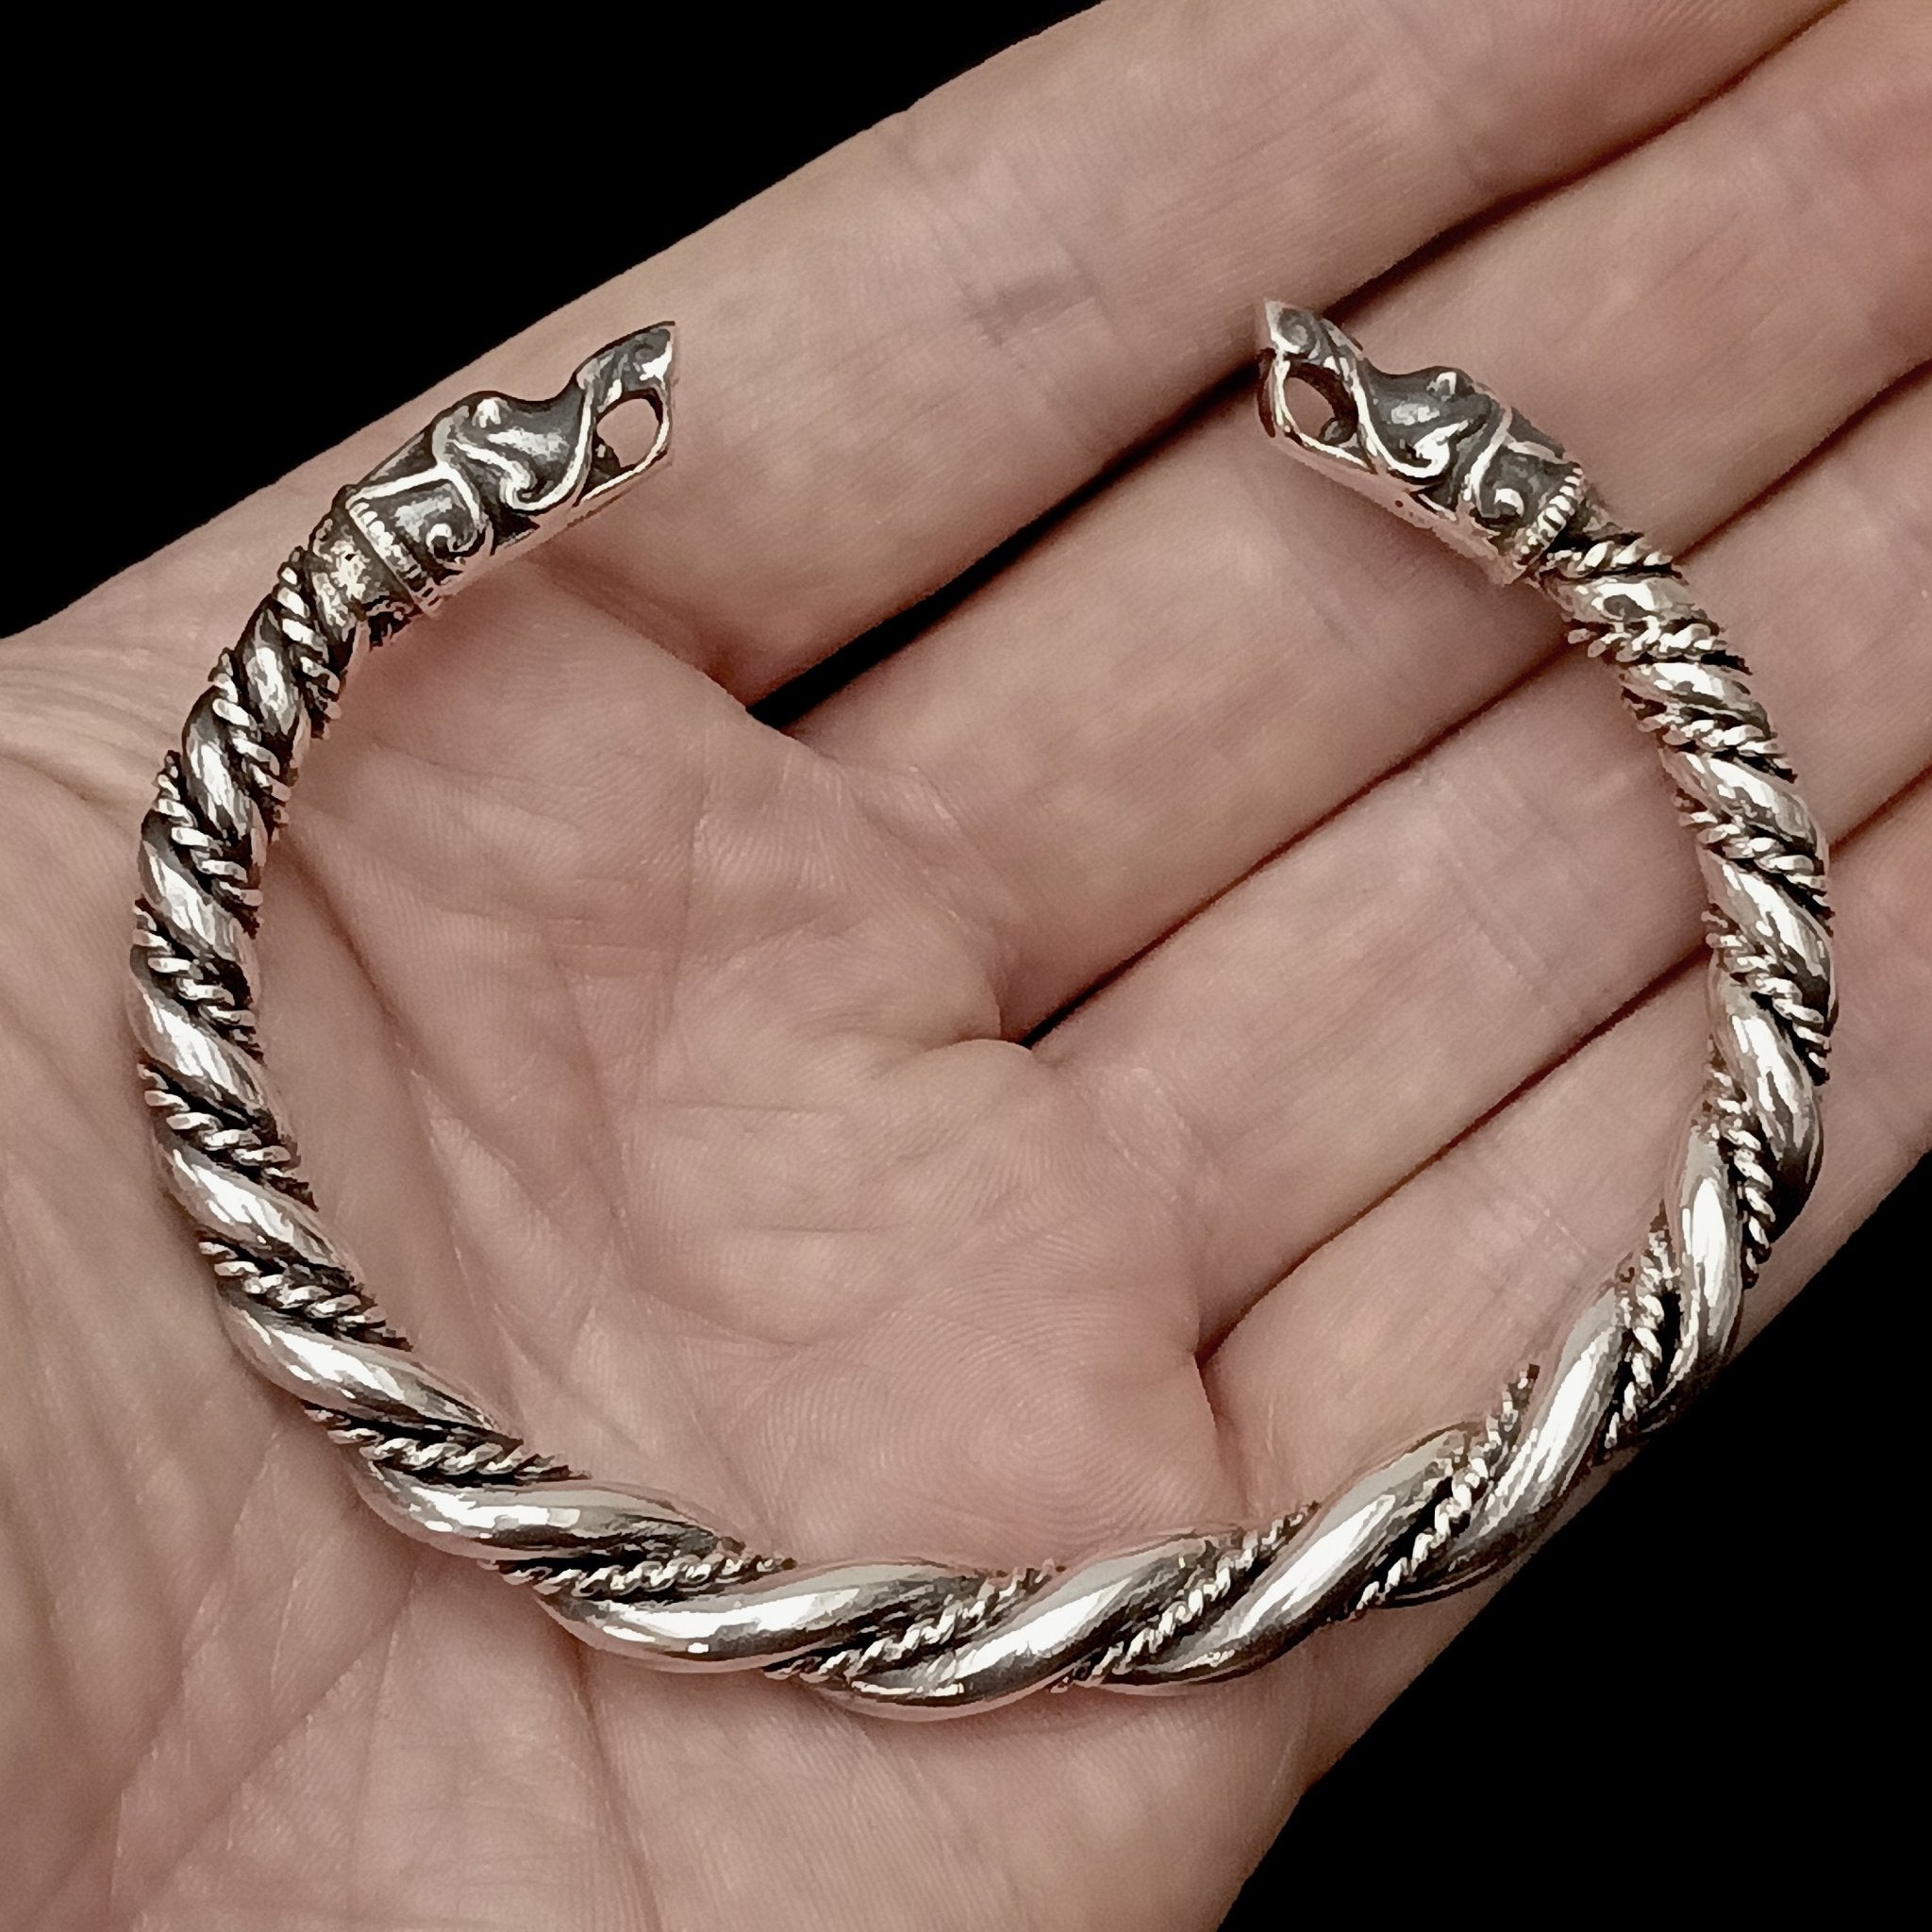 Twisted Silver Arm Ring / Bracelet With Gotlandic Dragon Heads